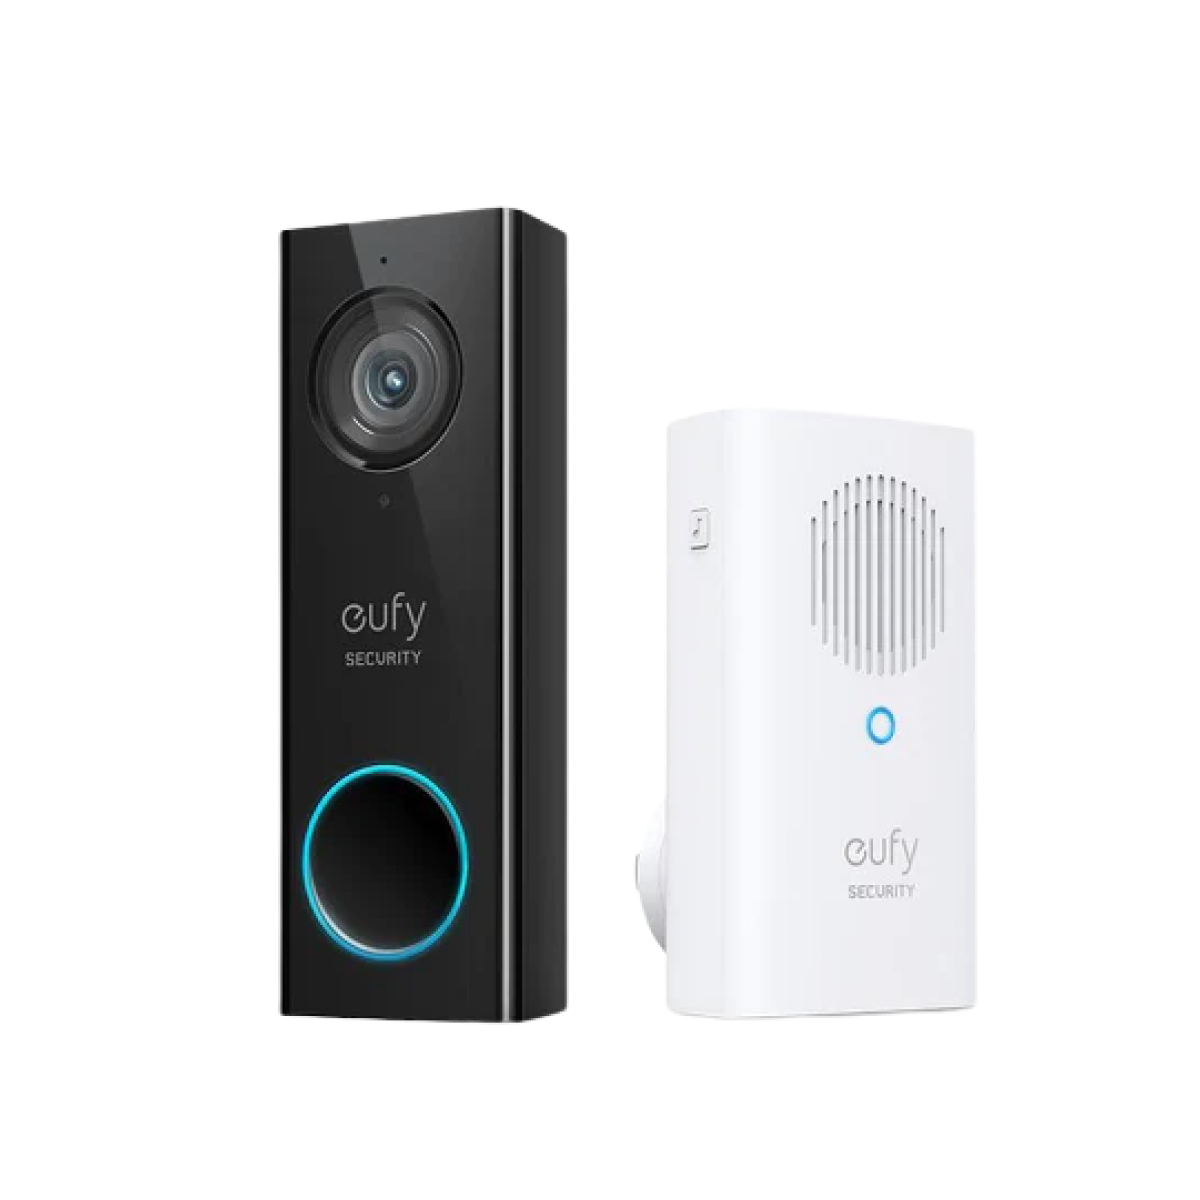 You Can Set Up a Eufy Security System for up to 59% Off Right Now